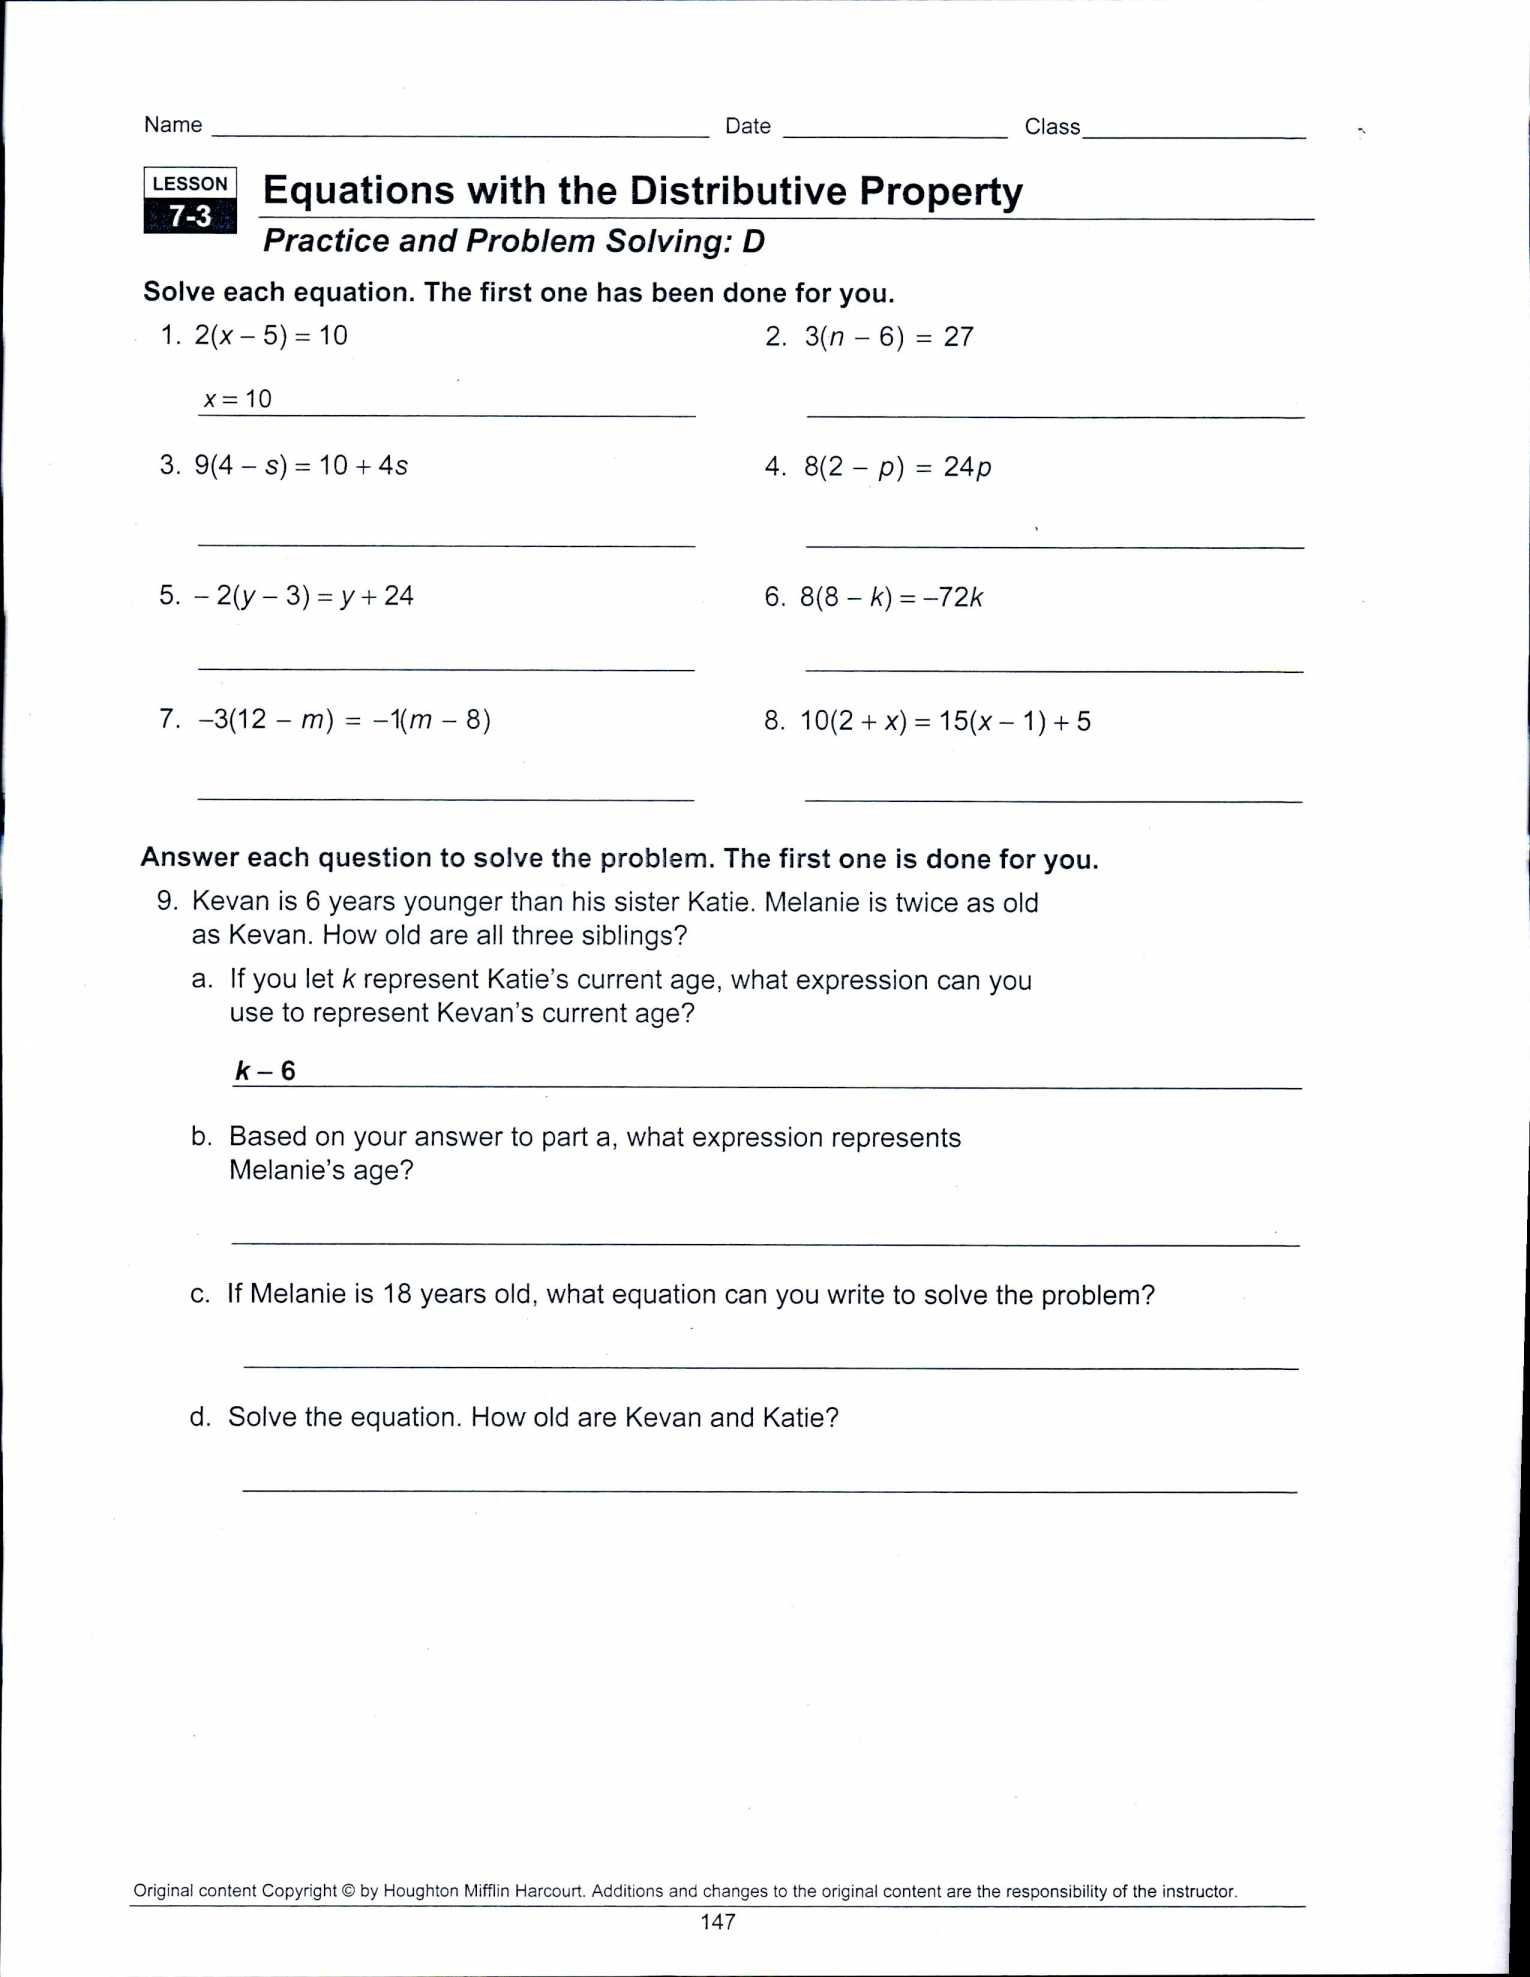 pearson-education-math-worksheets-answers-scientific-method-db-excel